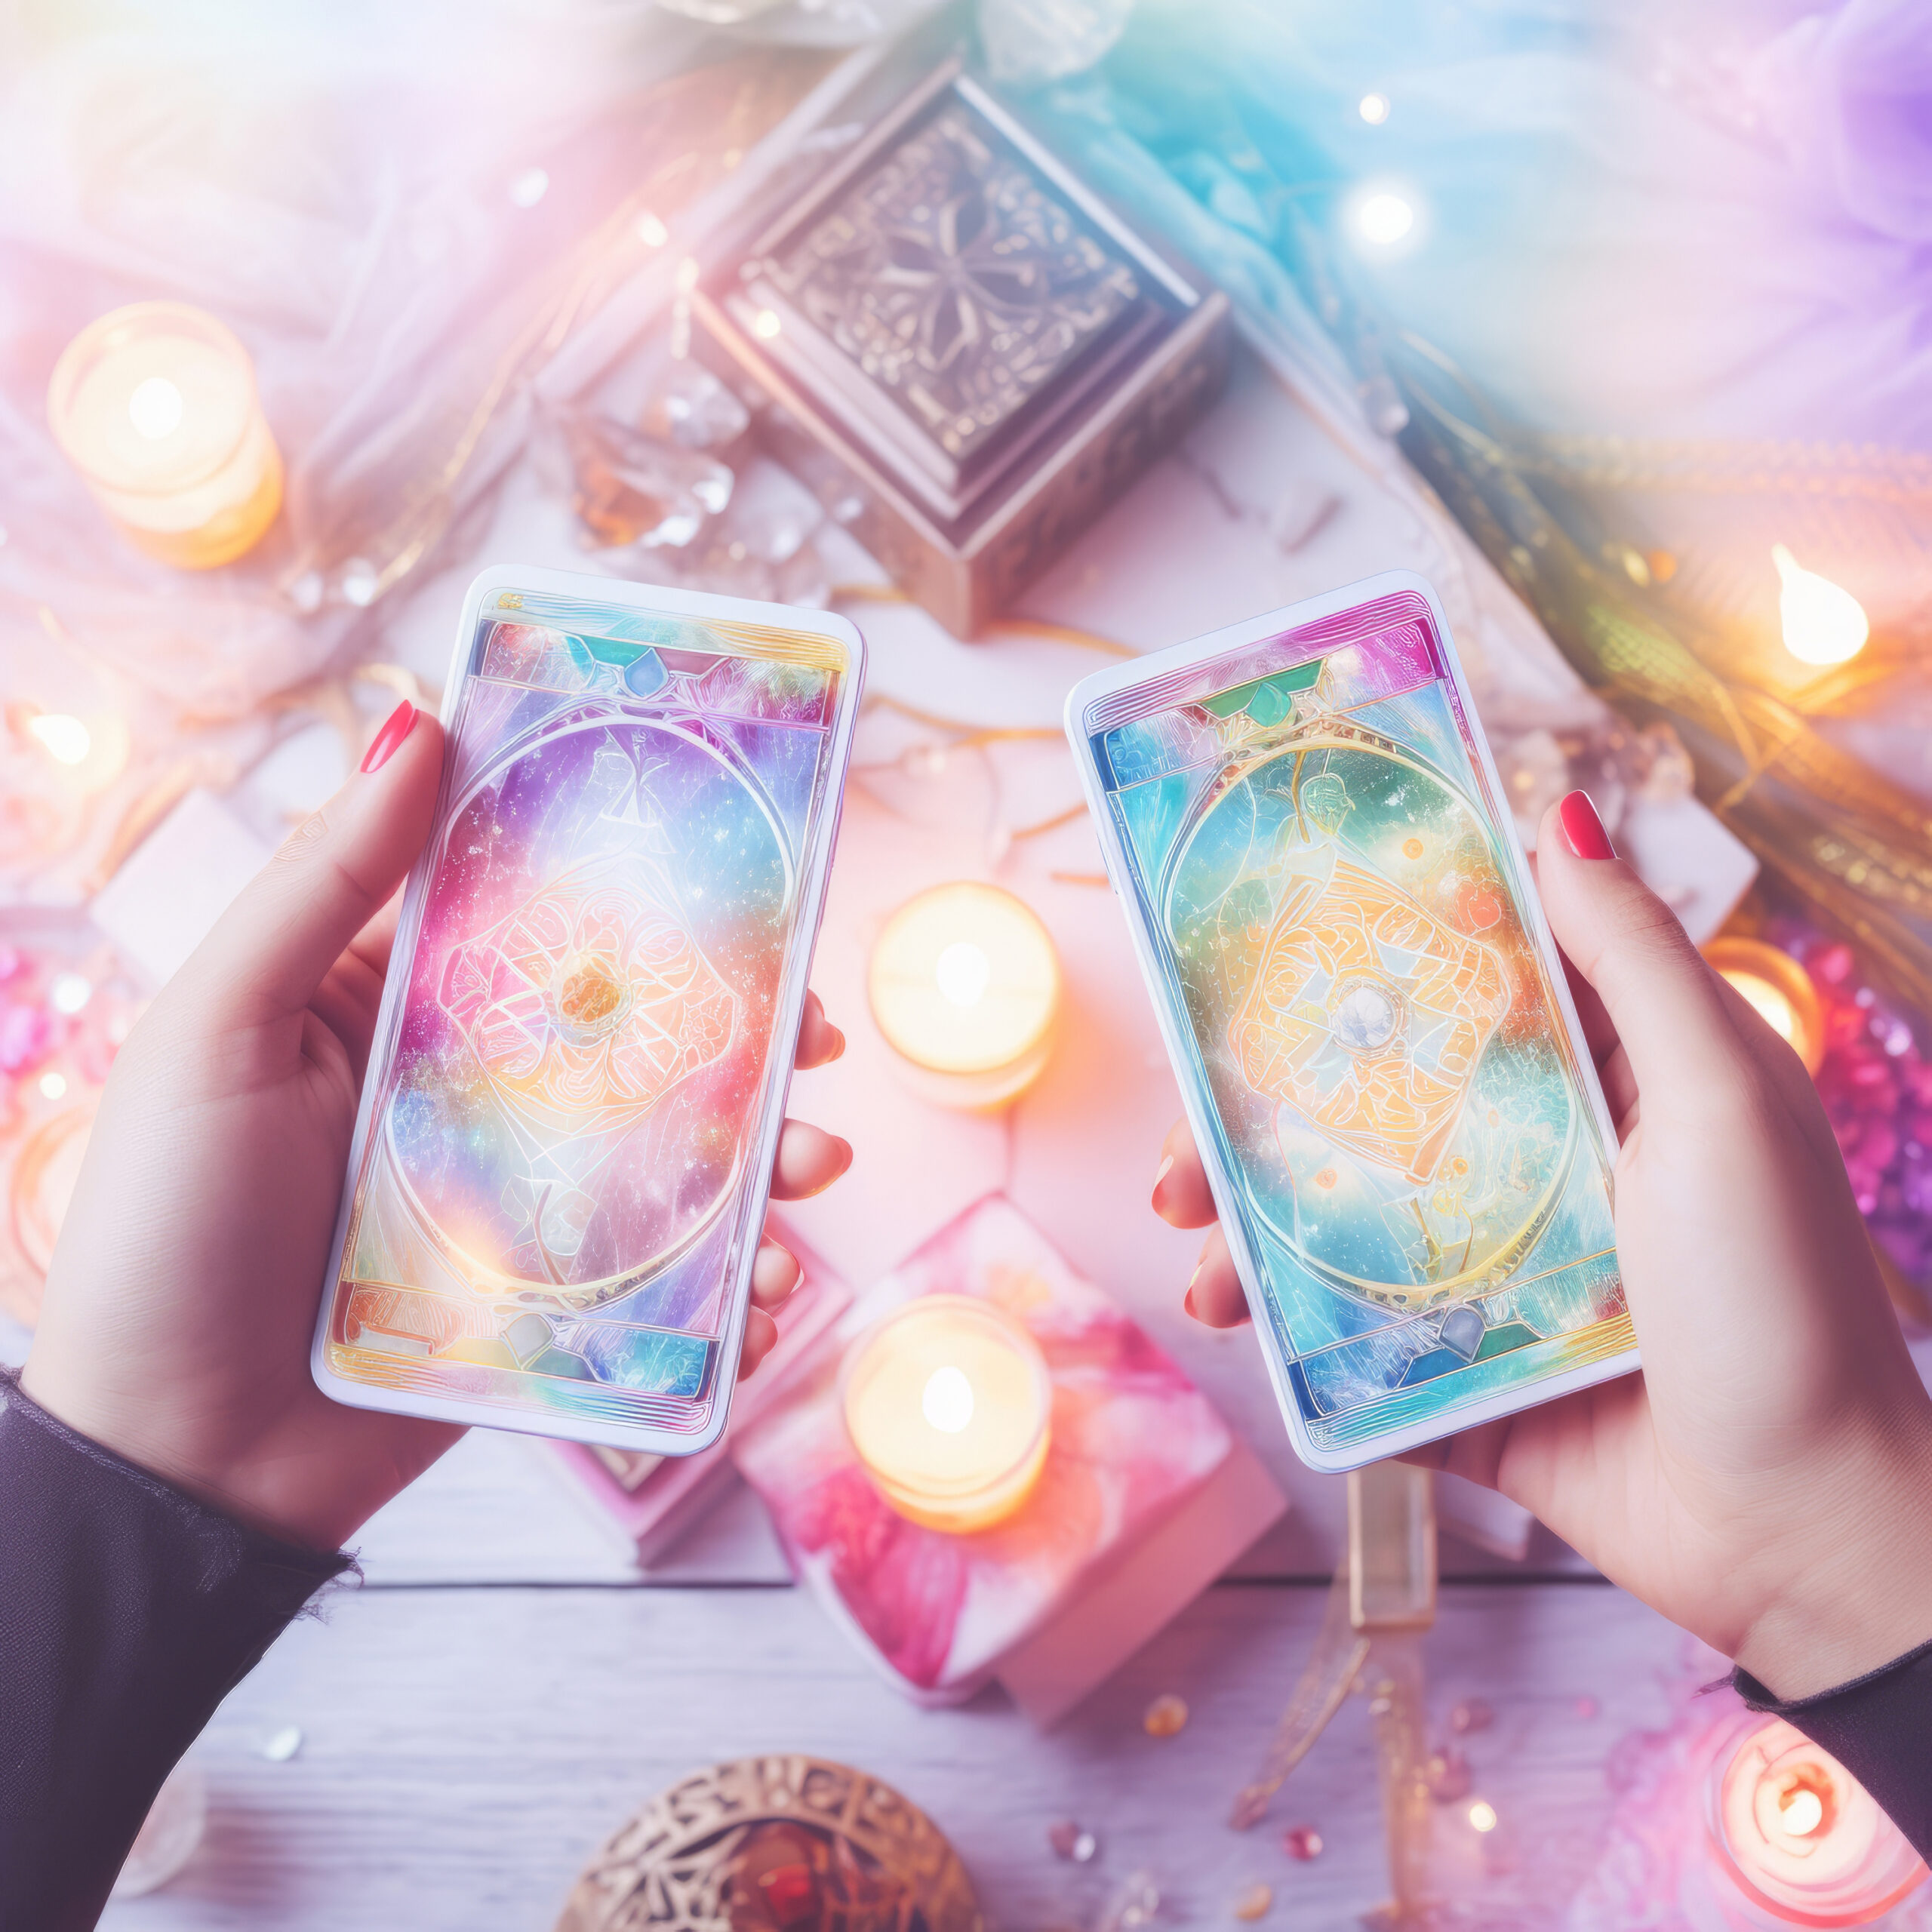 Embrace Your Journey with Tarot